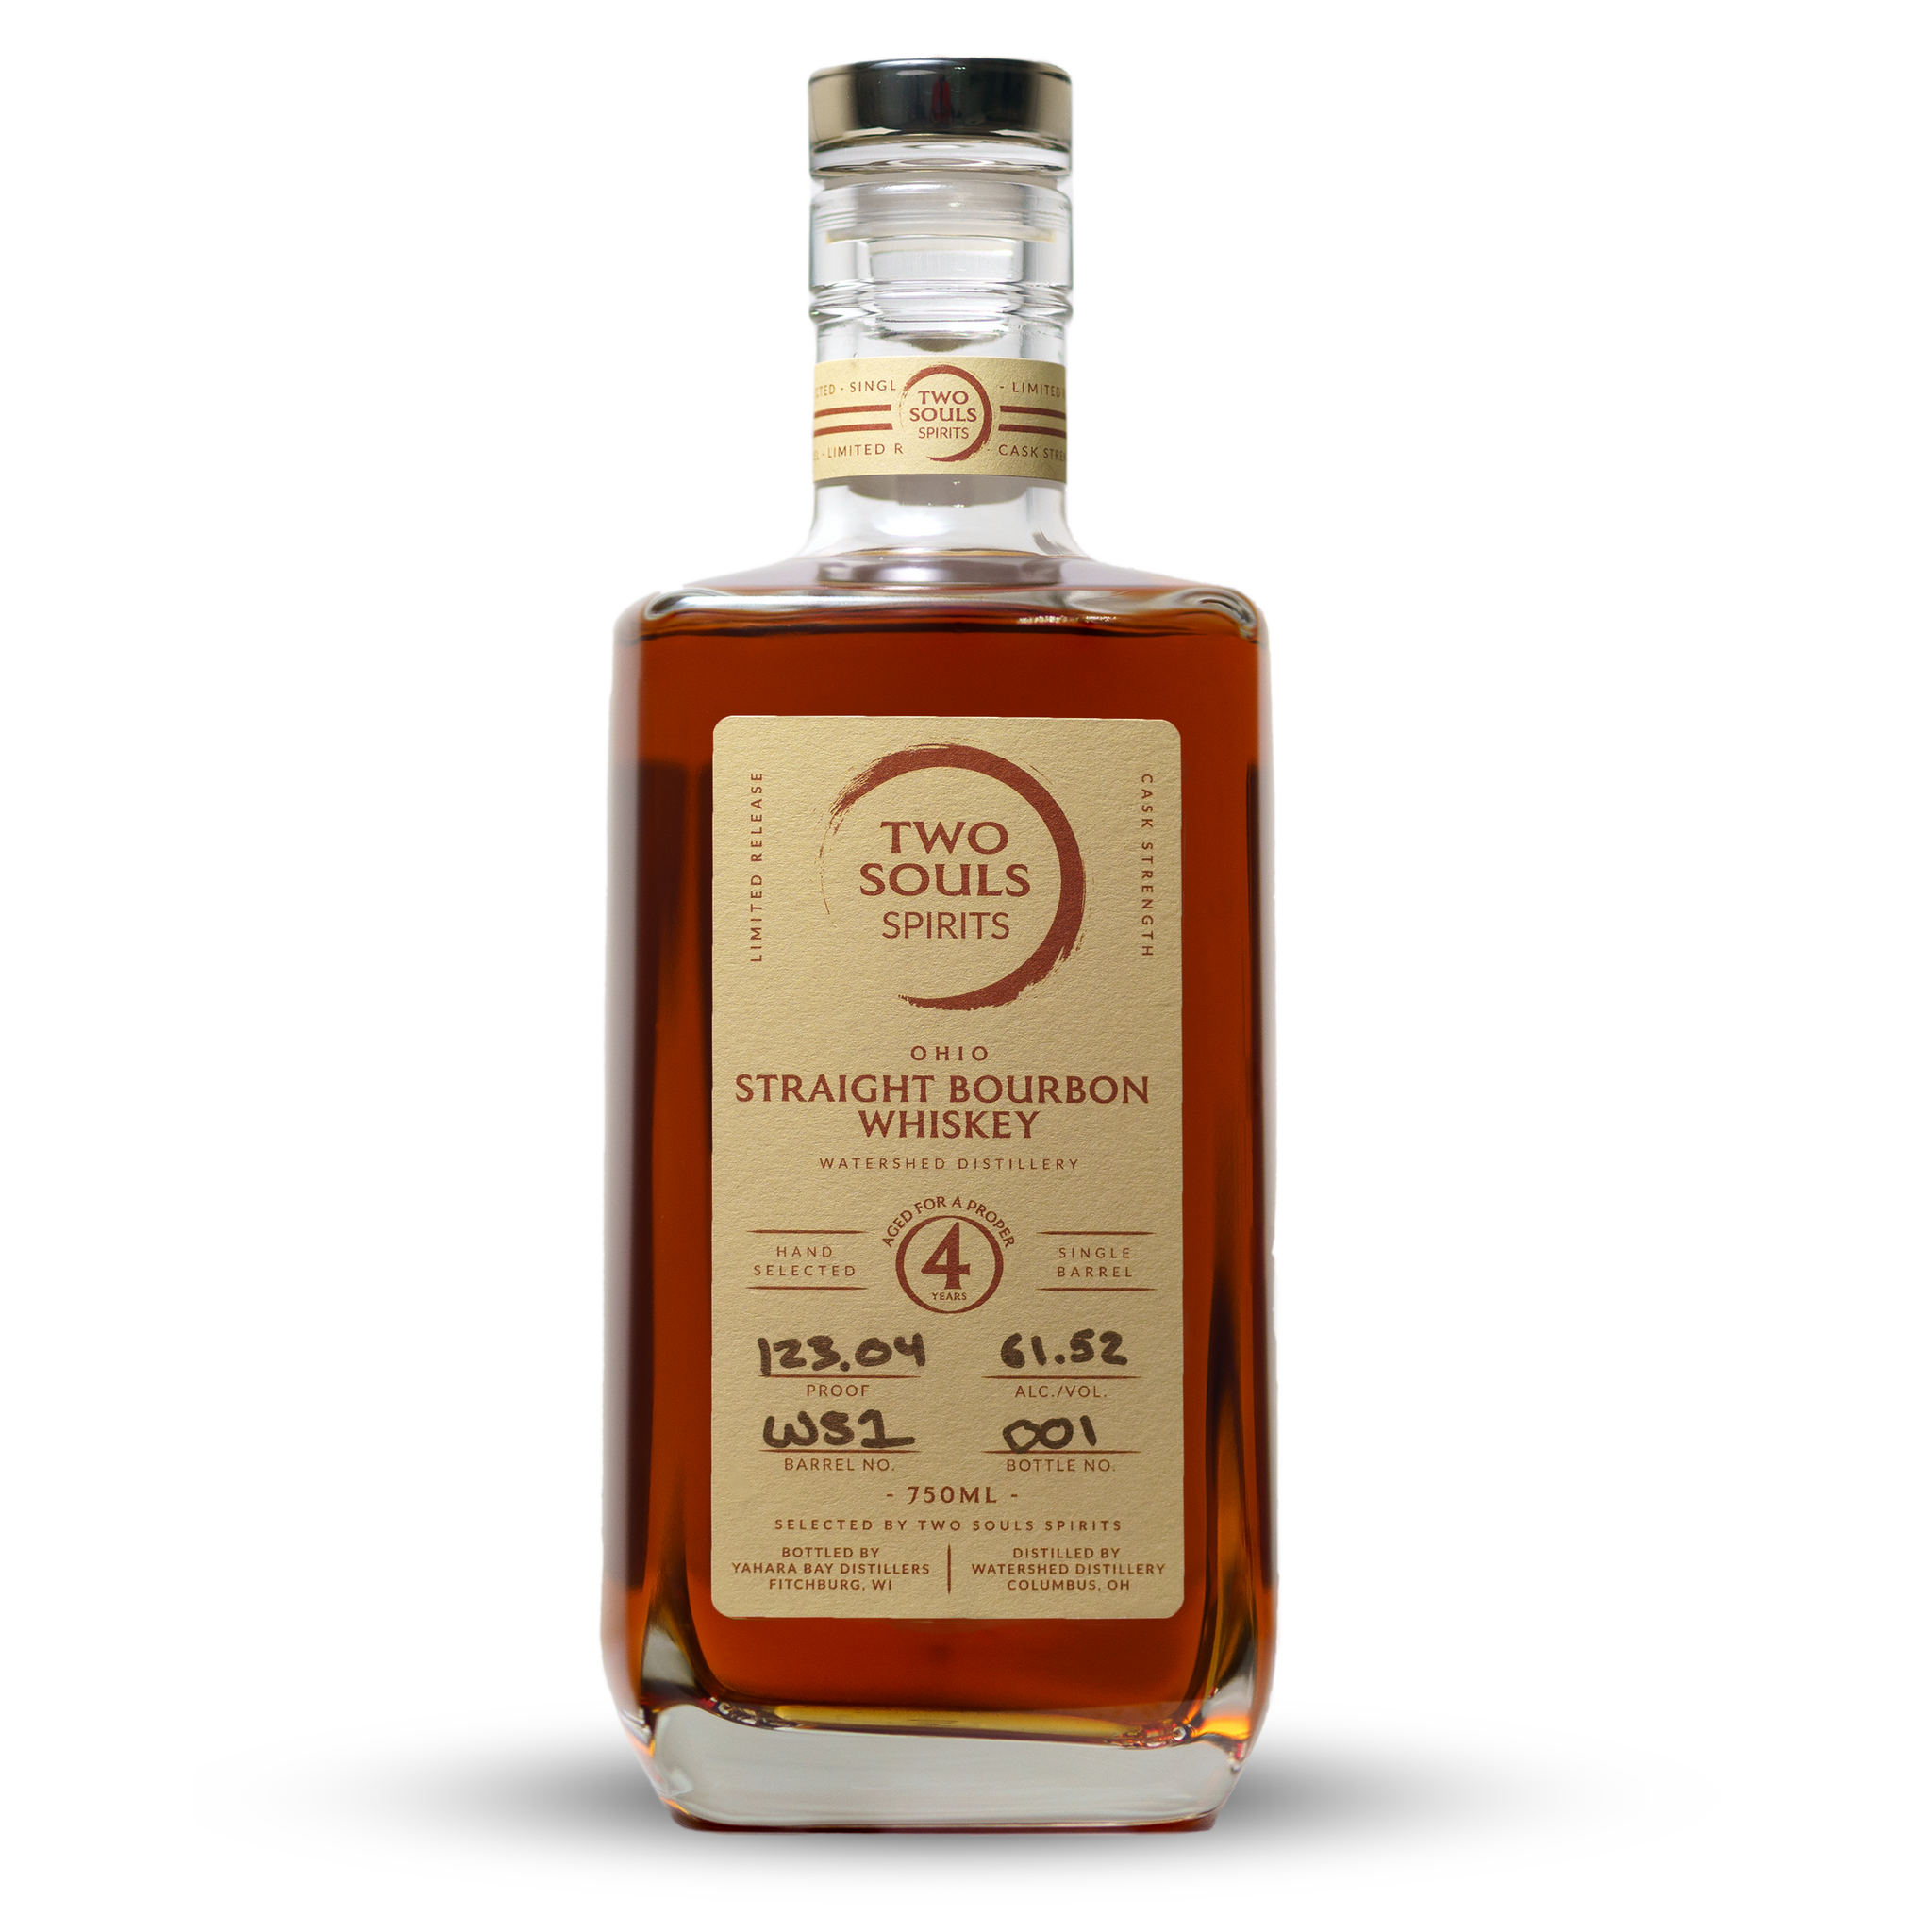 Straight Bourbon Whiskey from Two Souls Spirits in partnership with Watershed Distillery